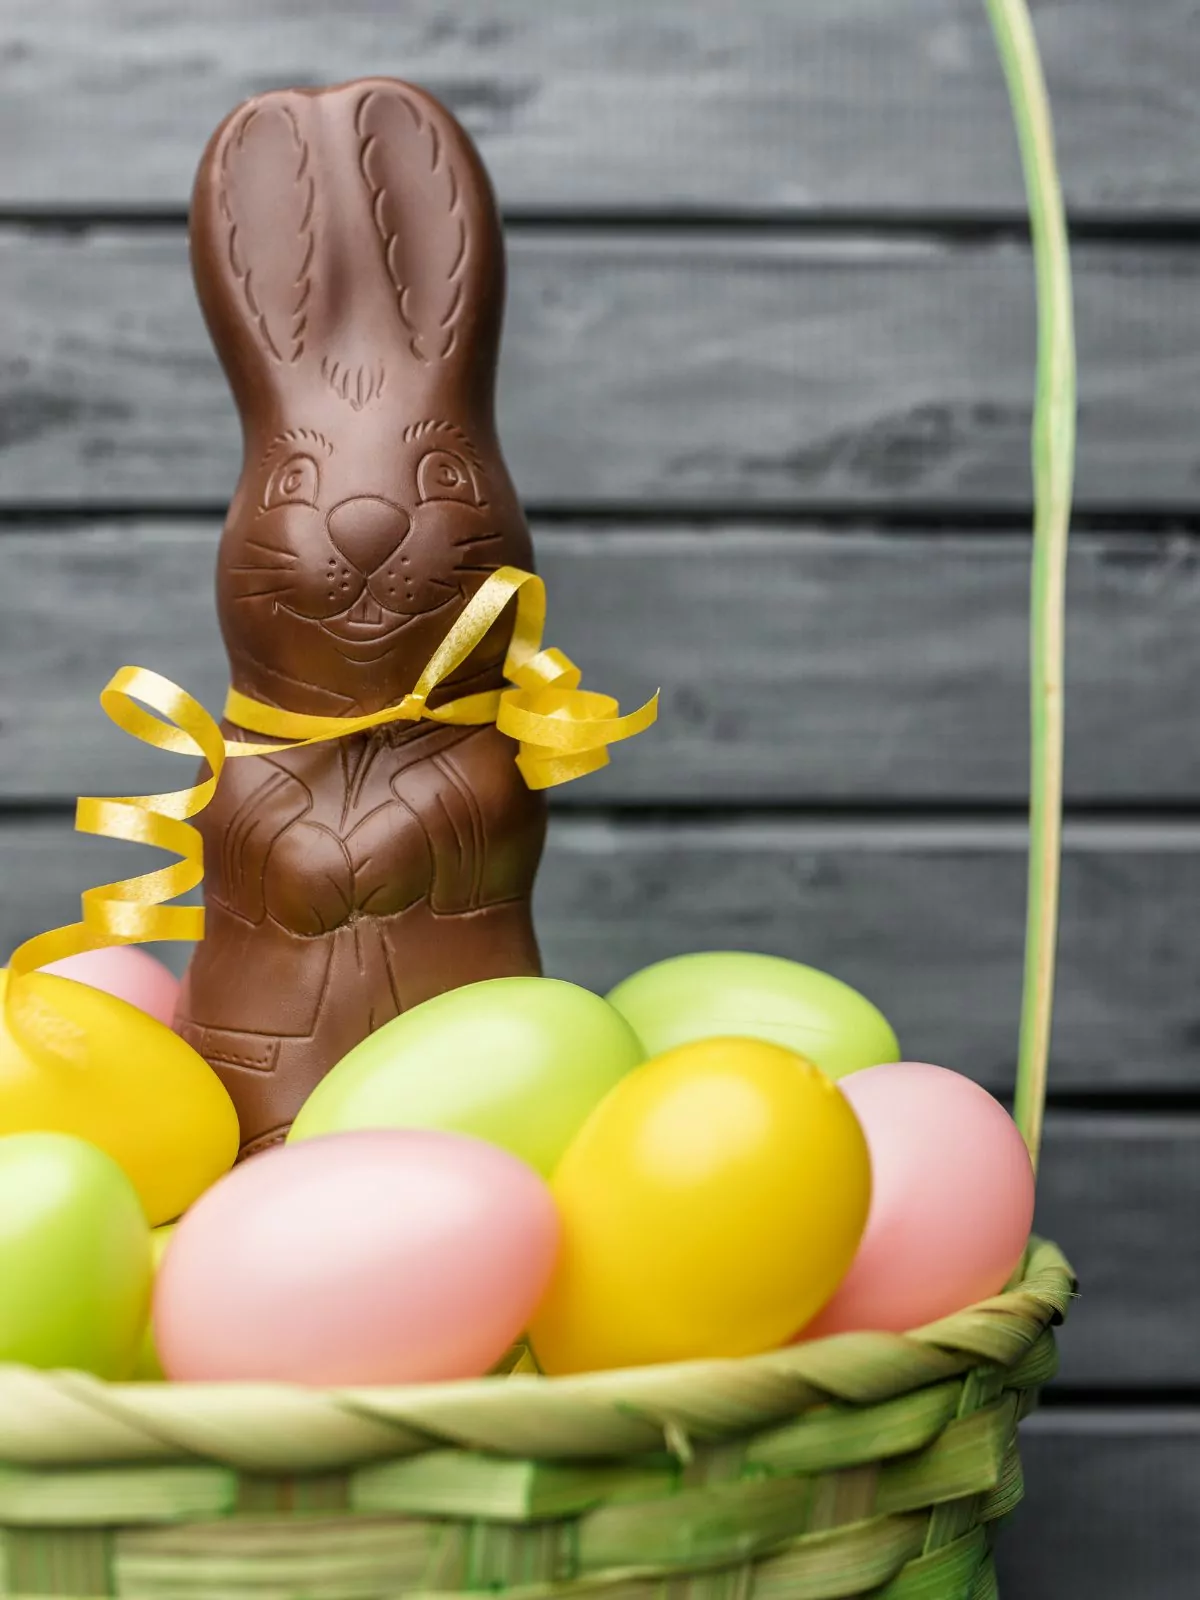 chocolate bunny in basket with plastic eggs.